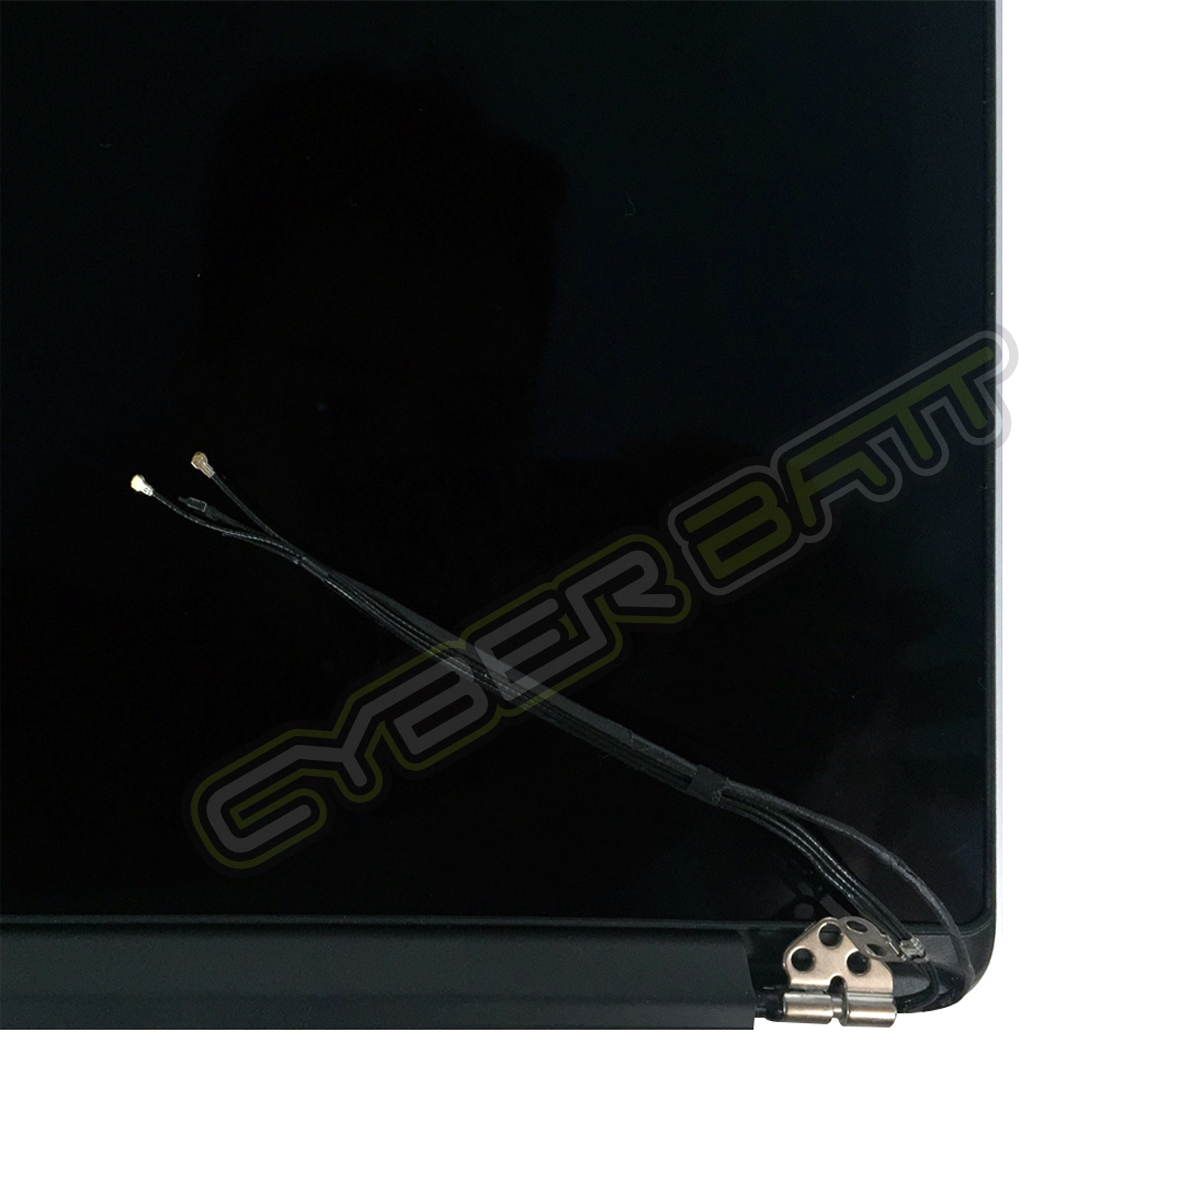 LCD Assembly MacBook Pro Retina 15 inch A1398 Late 2013-Mid 2014